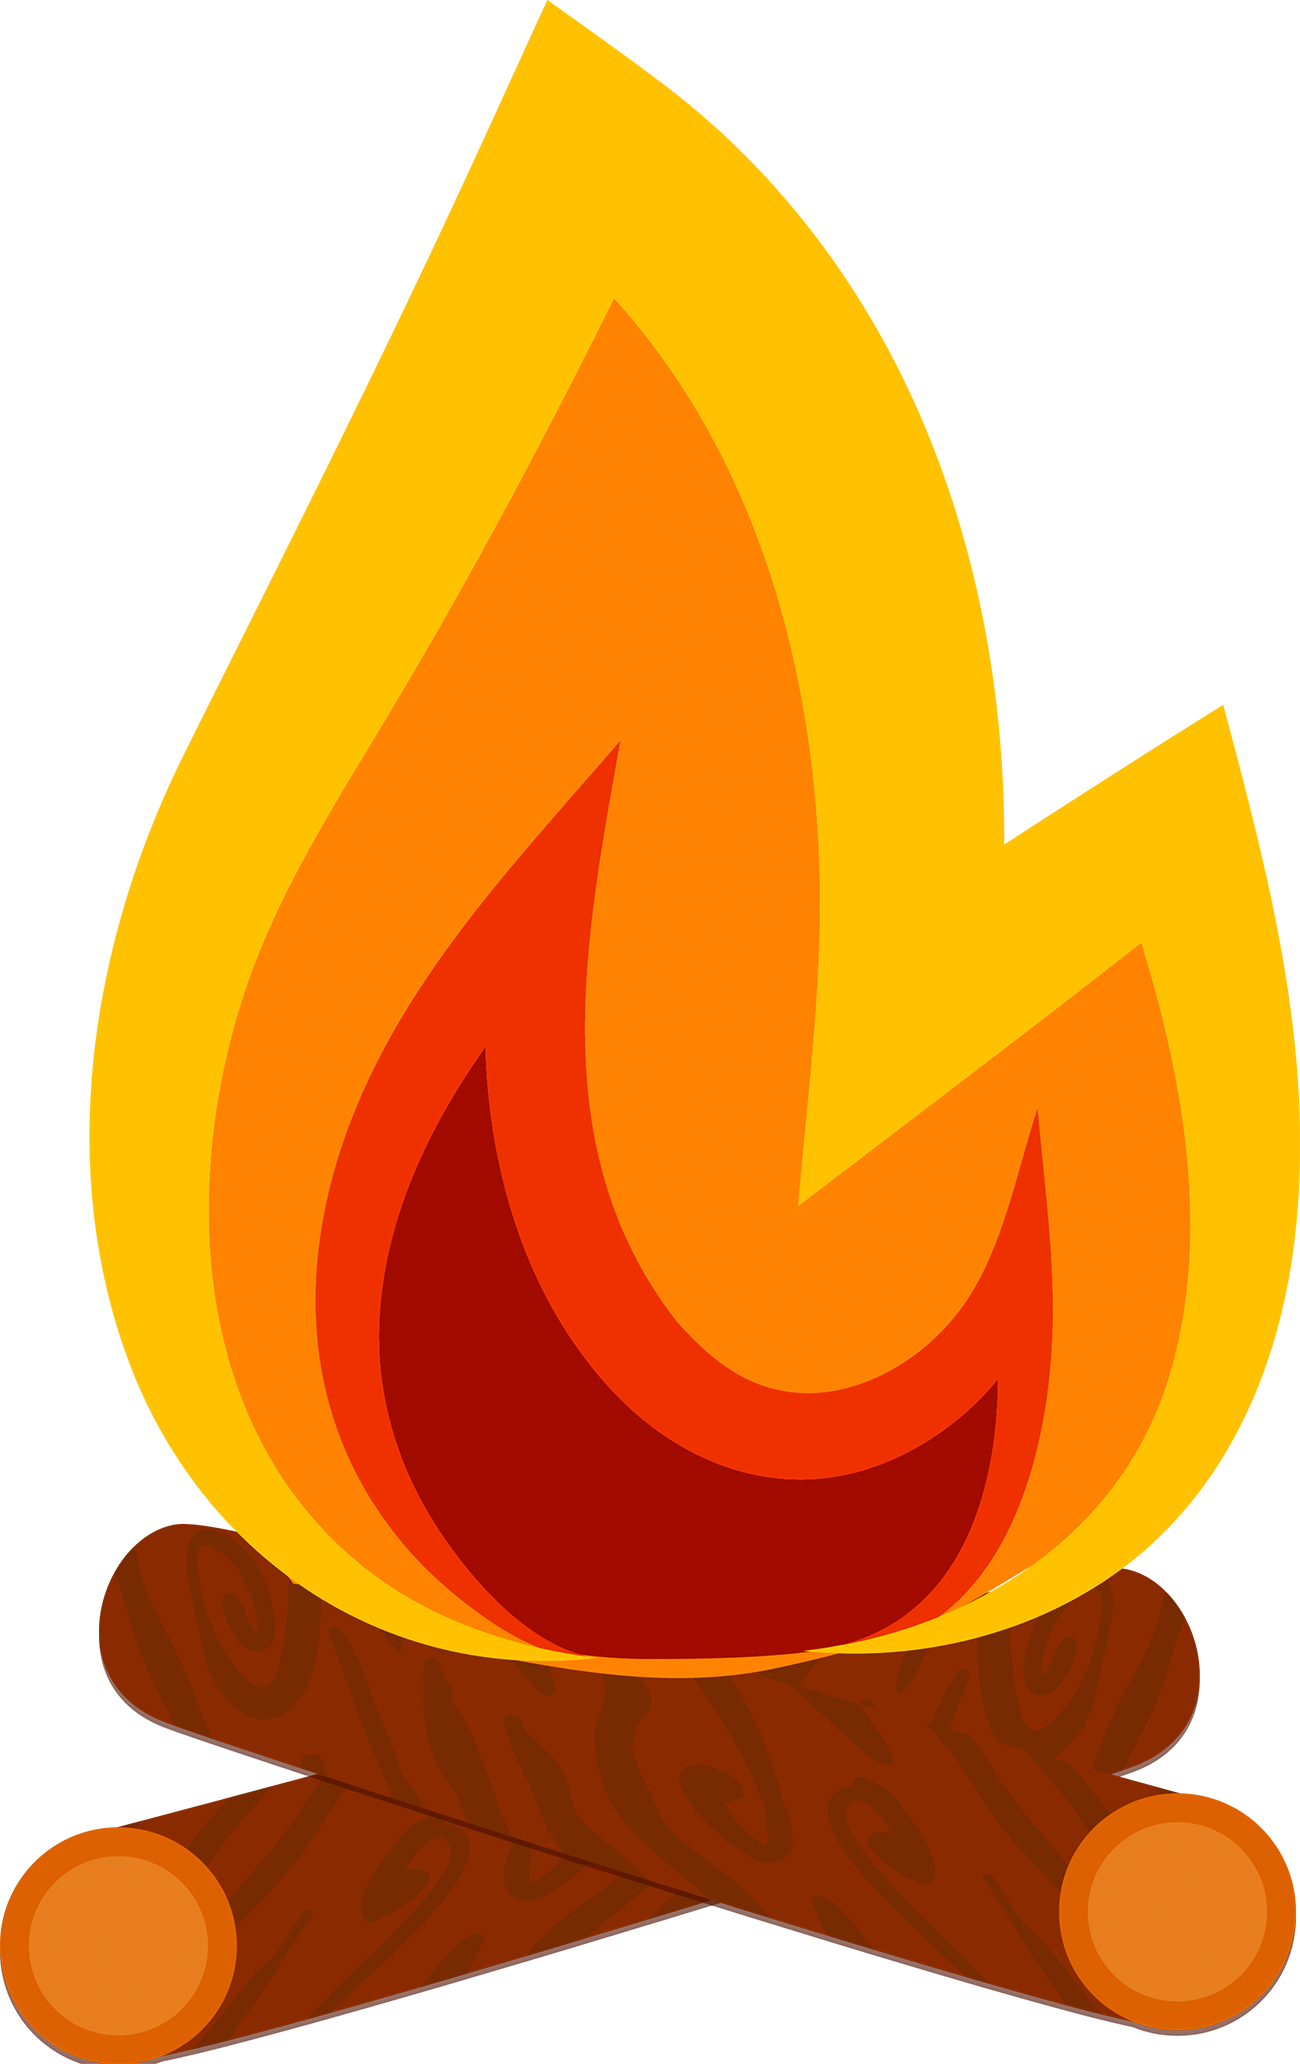 A Fire With A Black Background